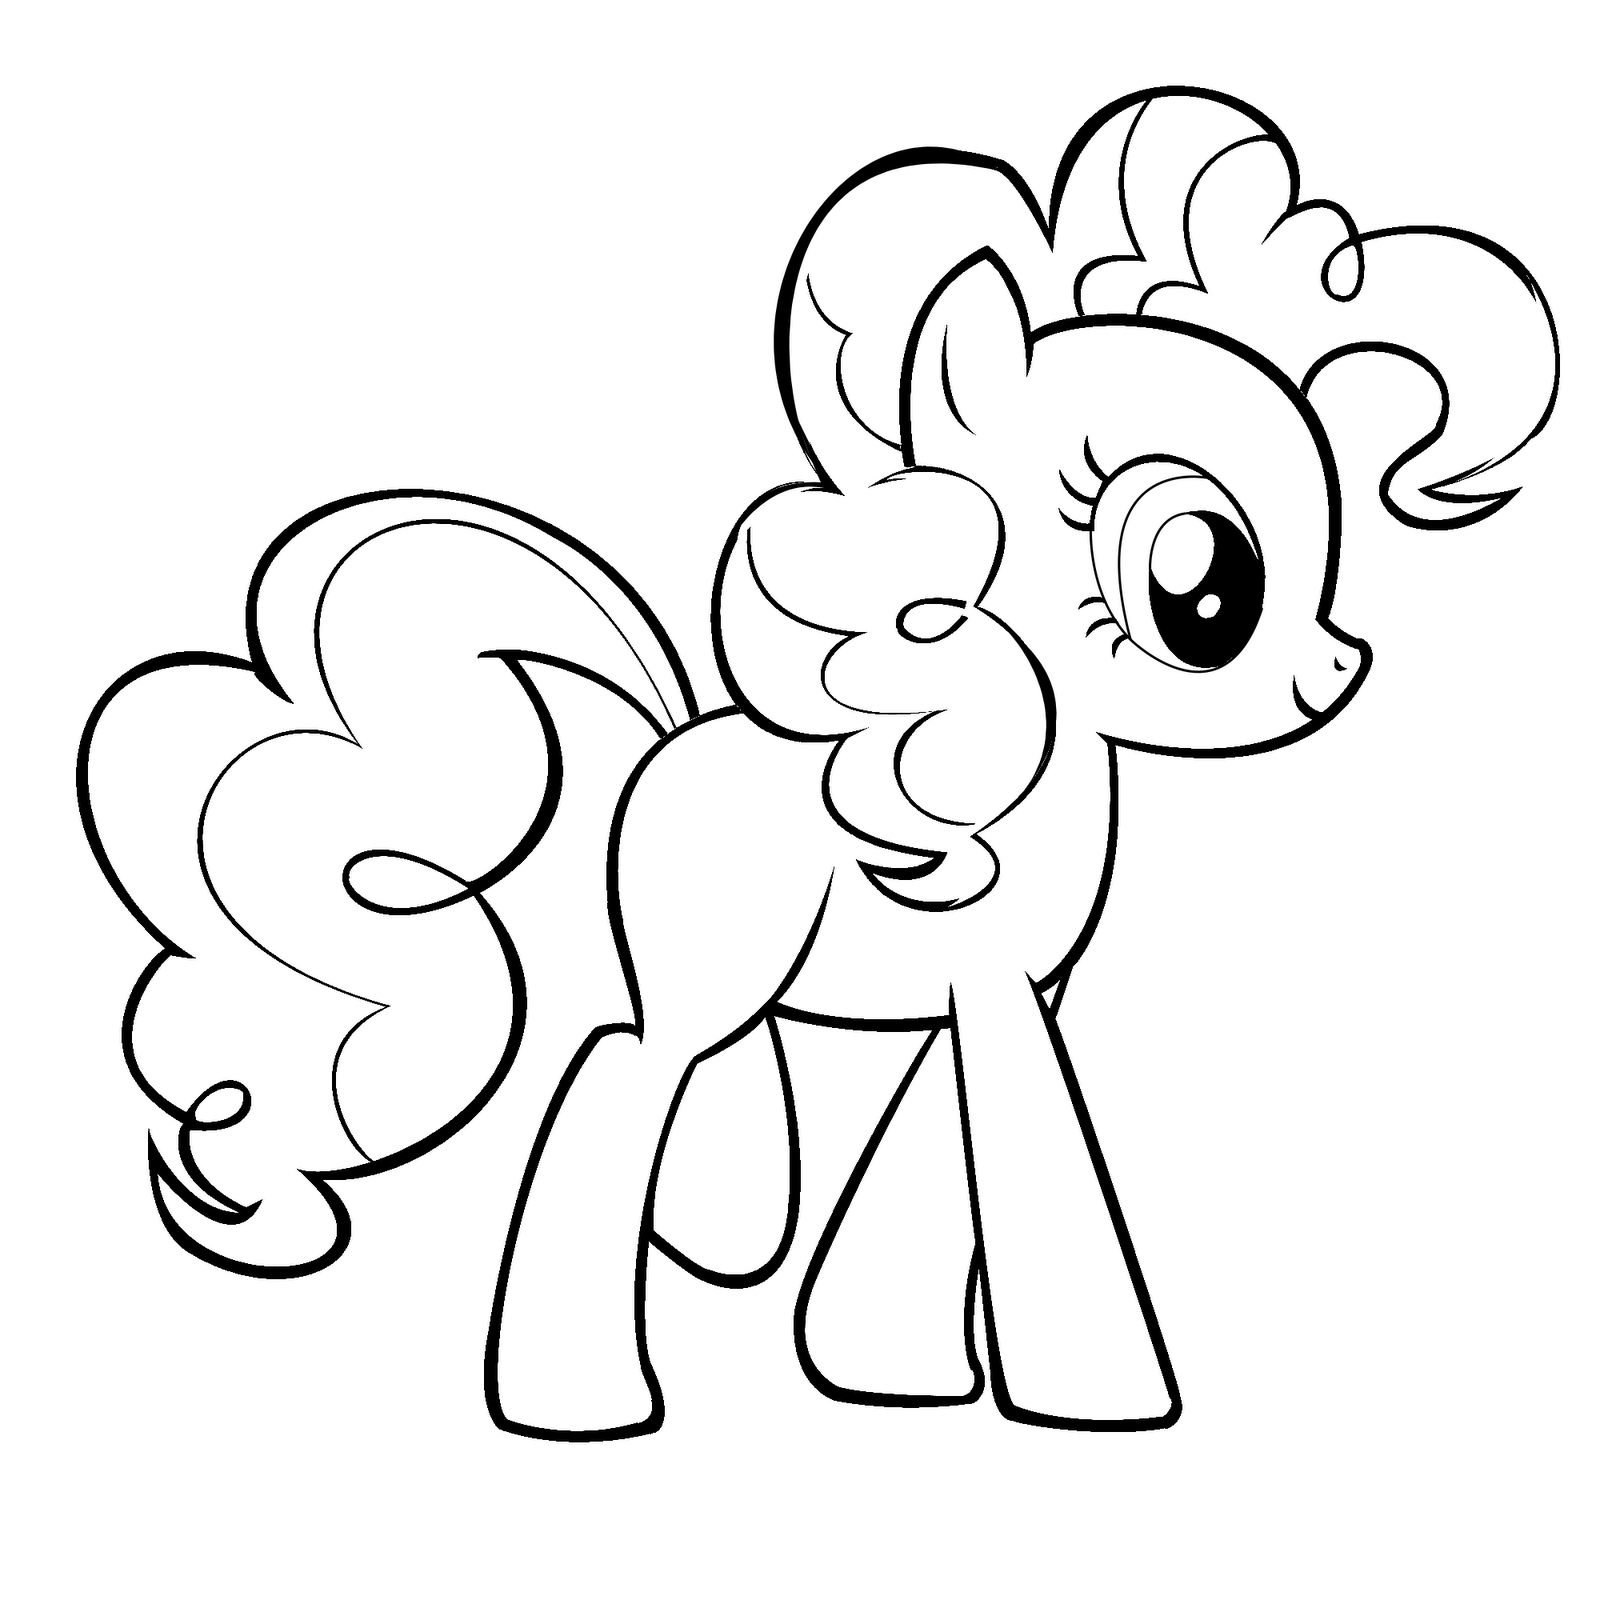 Pinkie Pie Coloring Page | Coloring Pages for Kids and for Adults